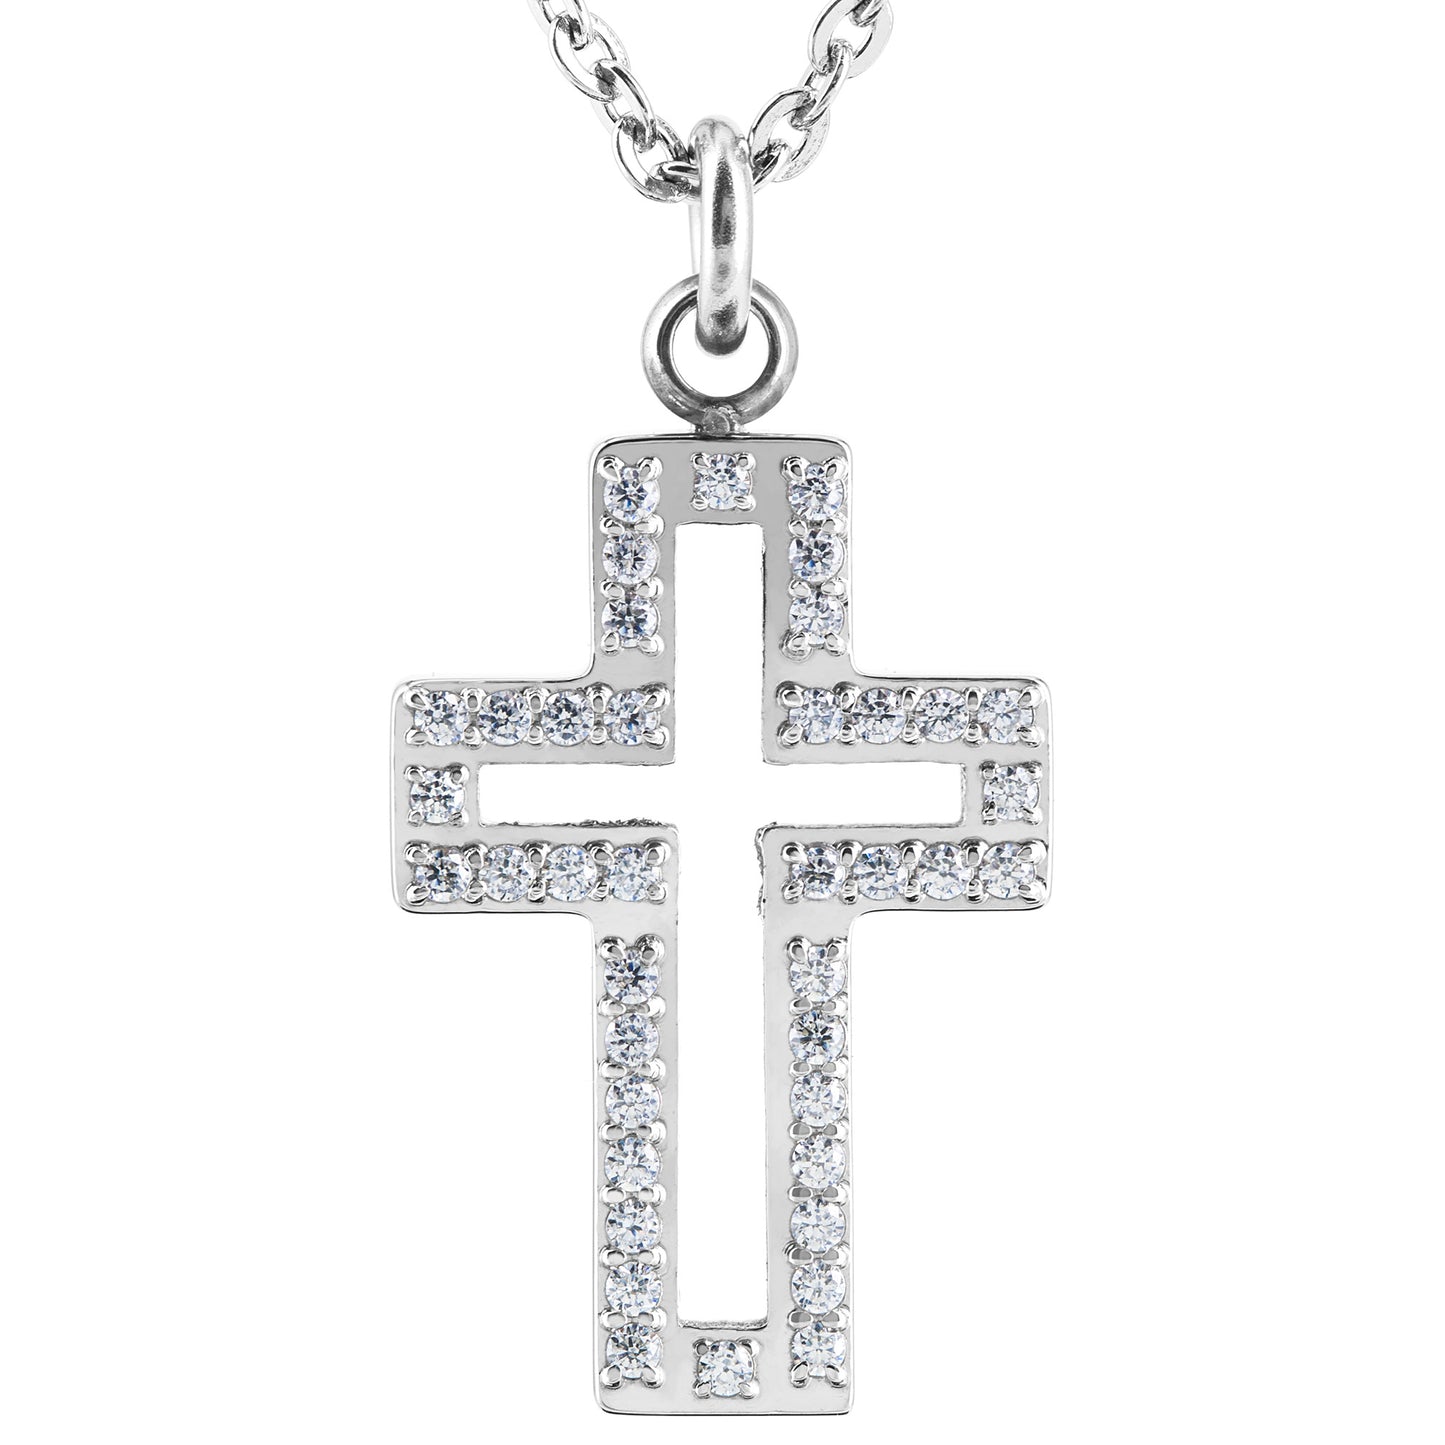 ELYA Cubic Zirconia Cut Out Cross Stainless Steel Pendant Necklace - 19"